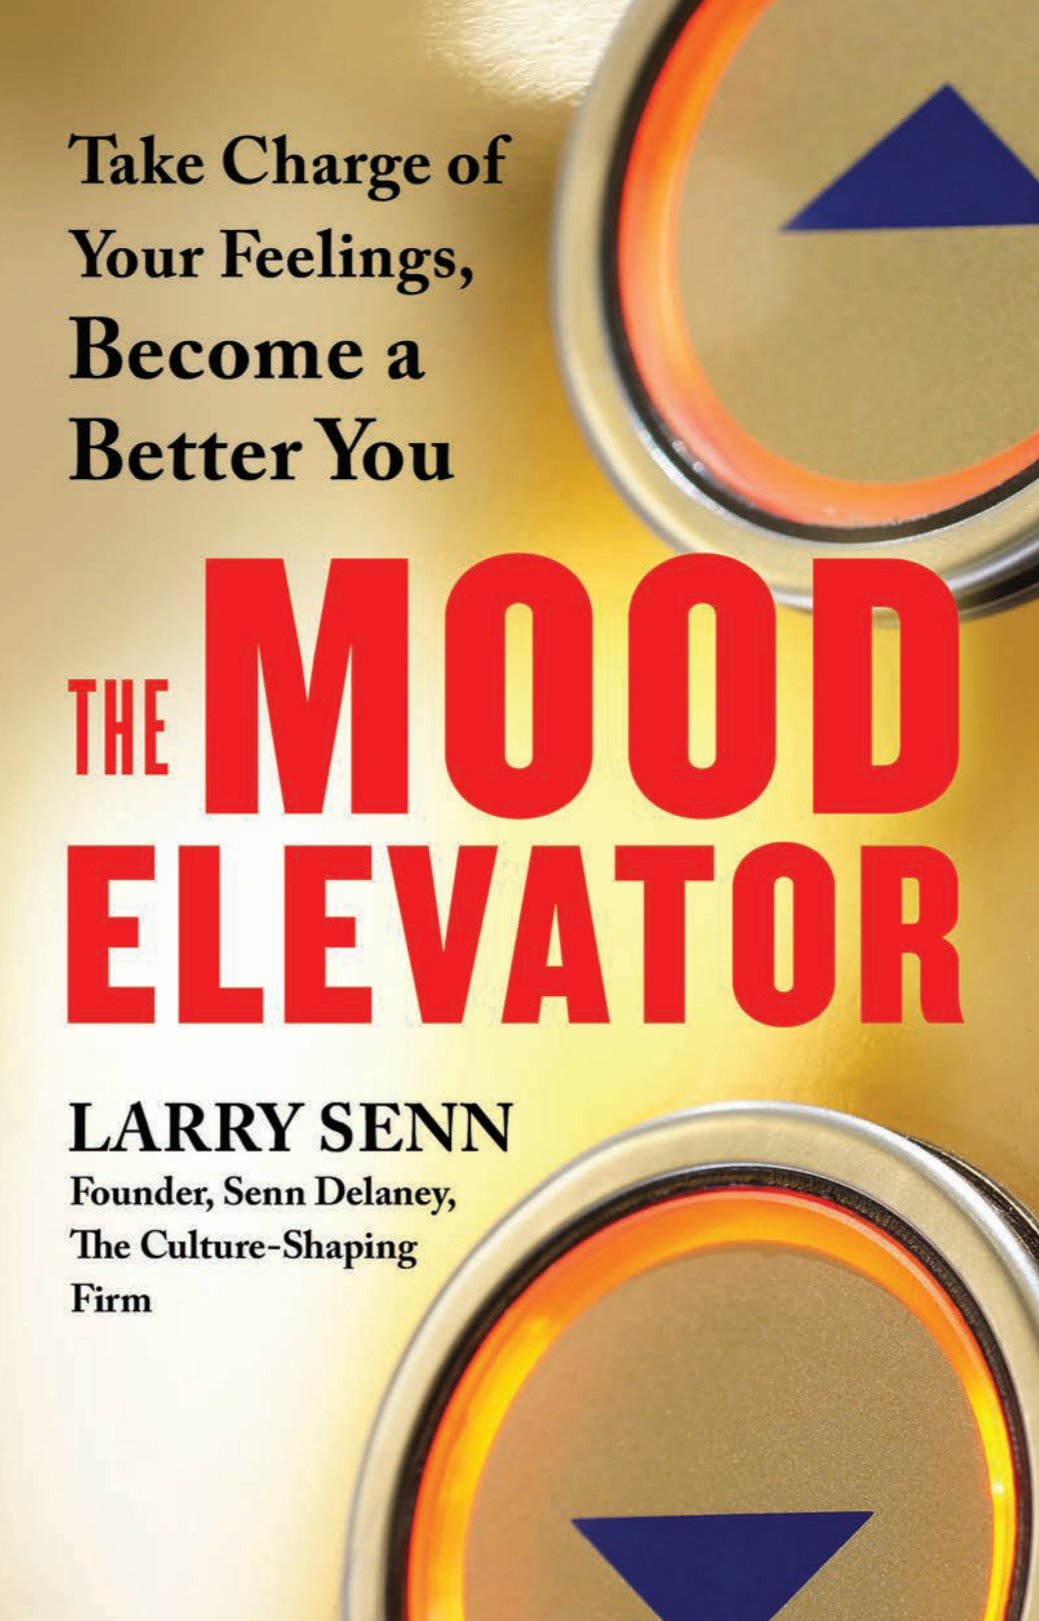 Larry Senn's 'The Mood Elevator' Shows Us How to Take Charge of Our